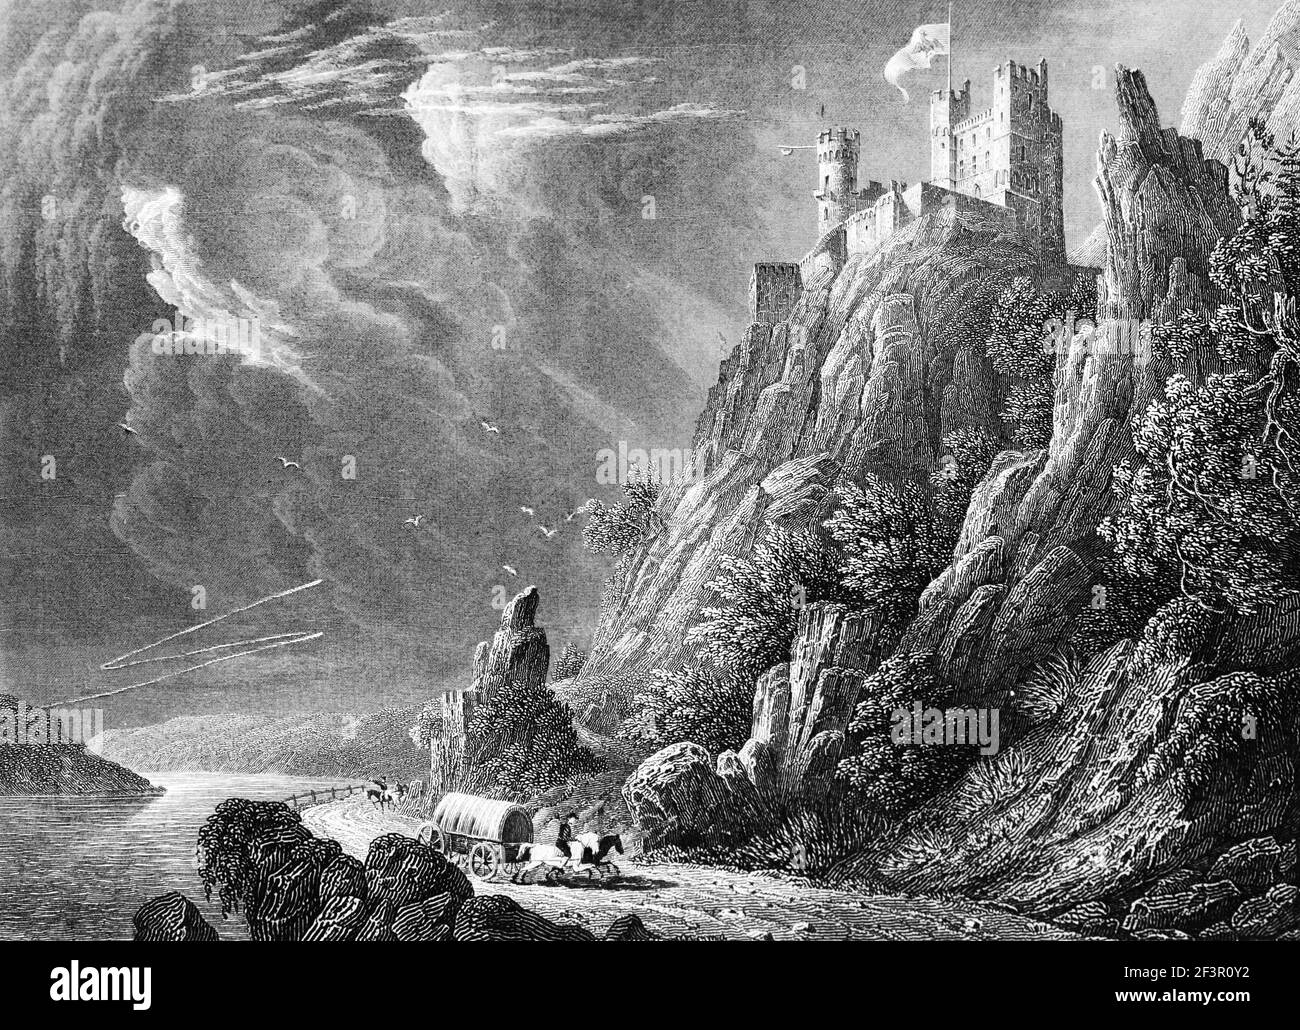 Castle Rheinstein, today a hotel, restaurant and museum, Trechtingshausen on the Rhine River, Rhineland-Palatinate, Germany, Steel engraving of 1832 Stock Photo